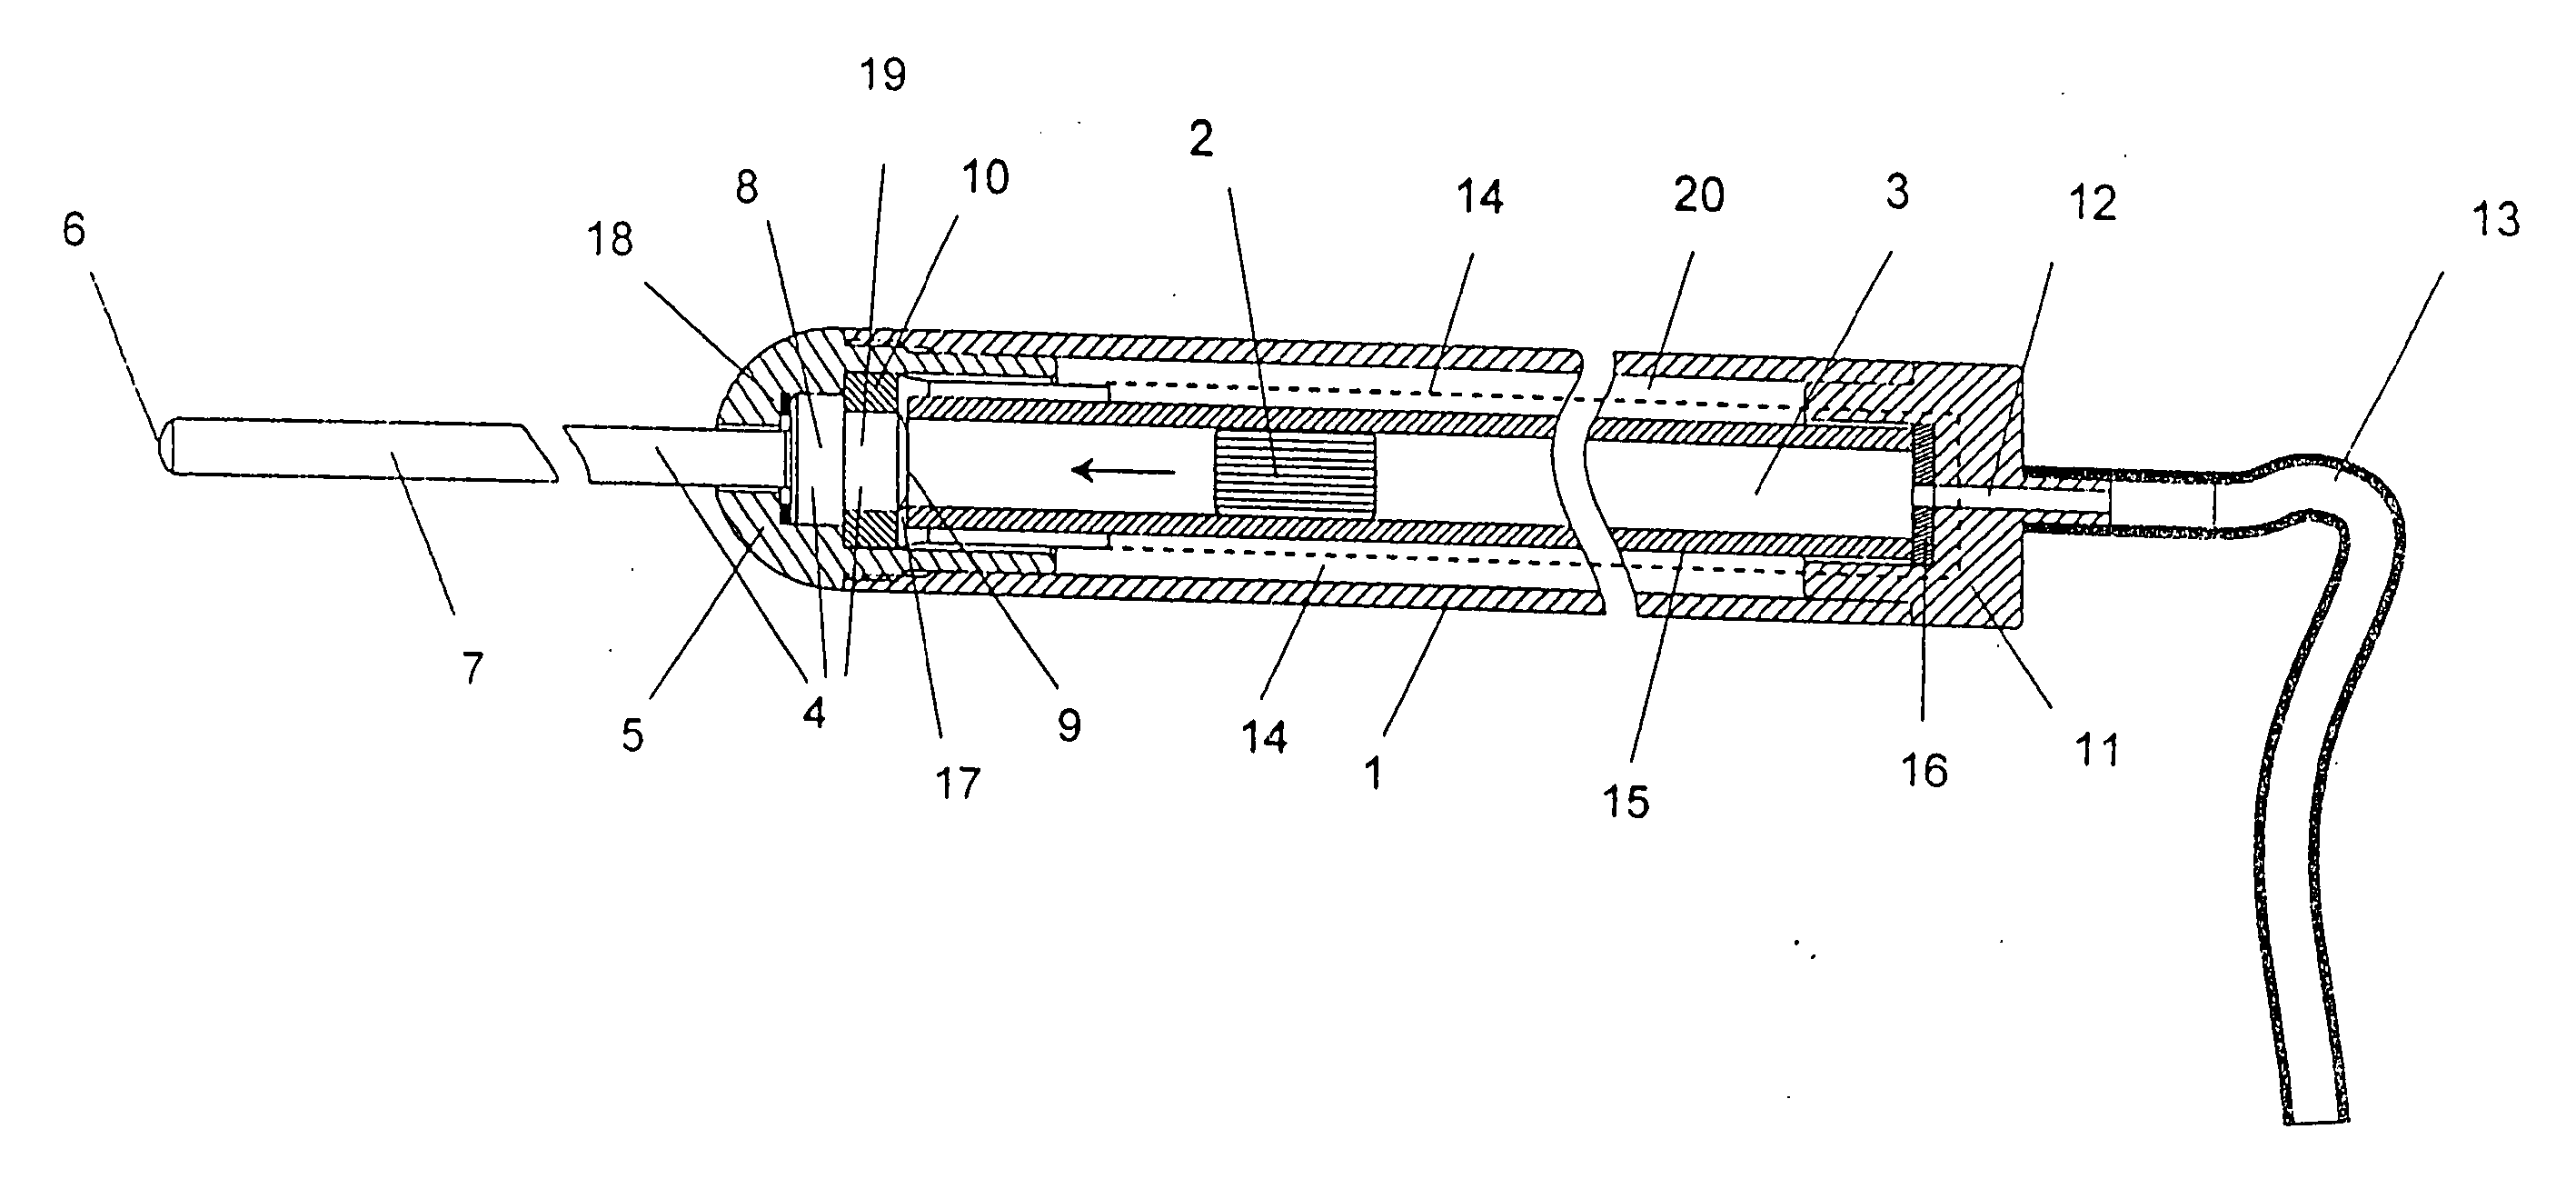 Device and method for removing tooth applications such as brackets